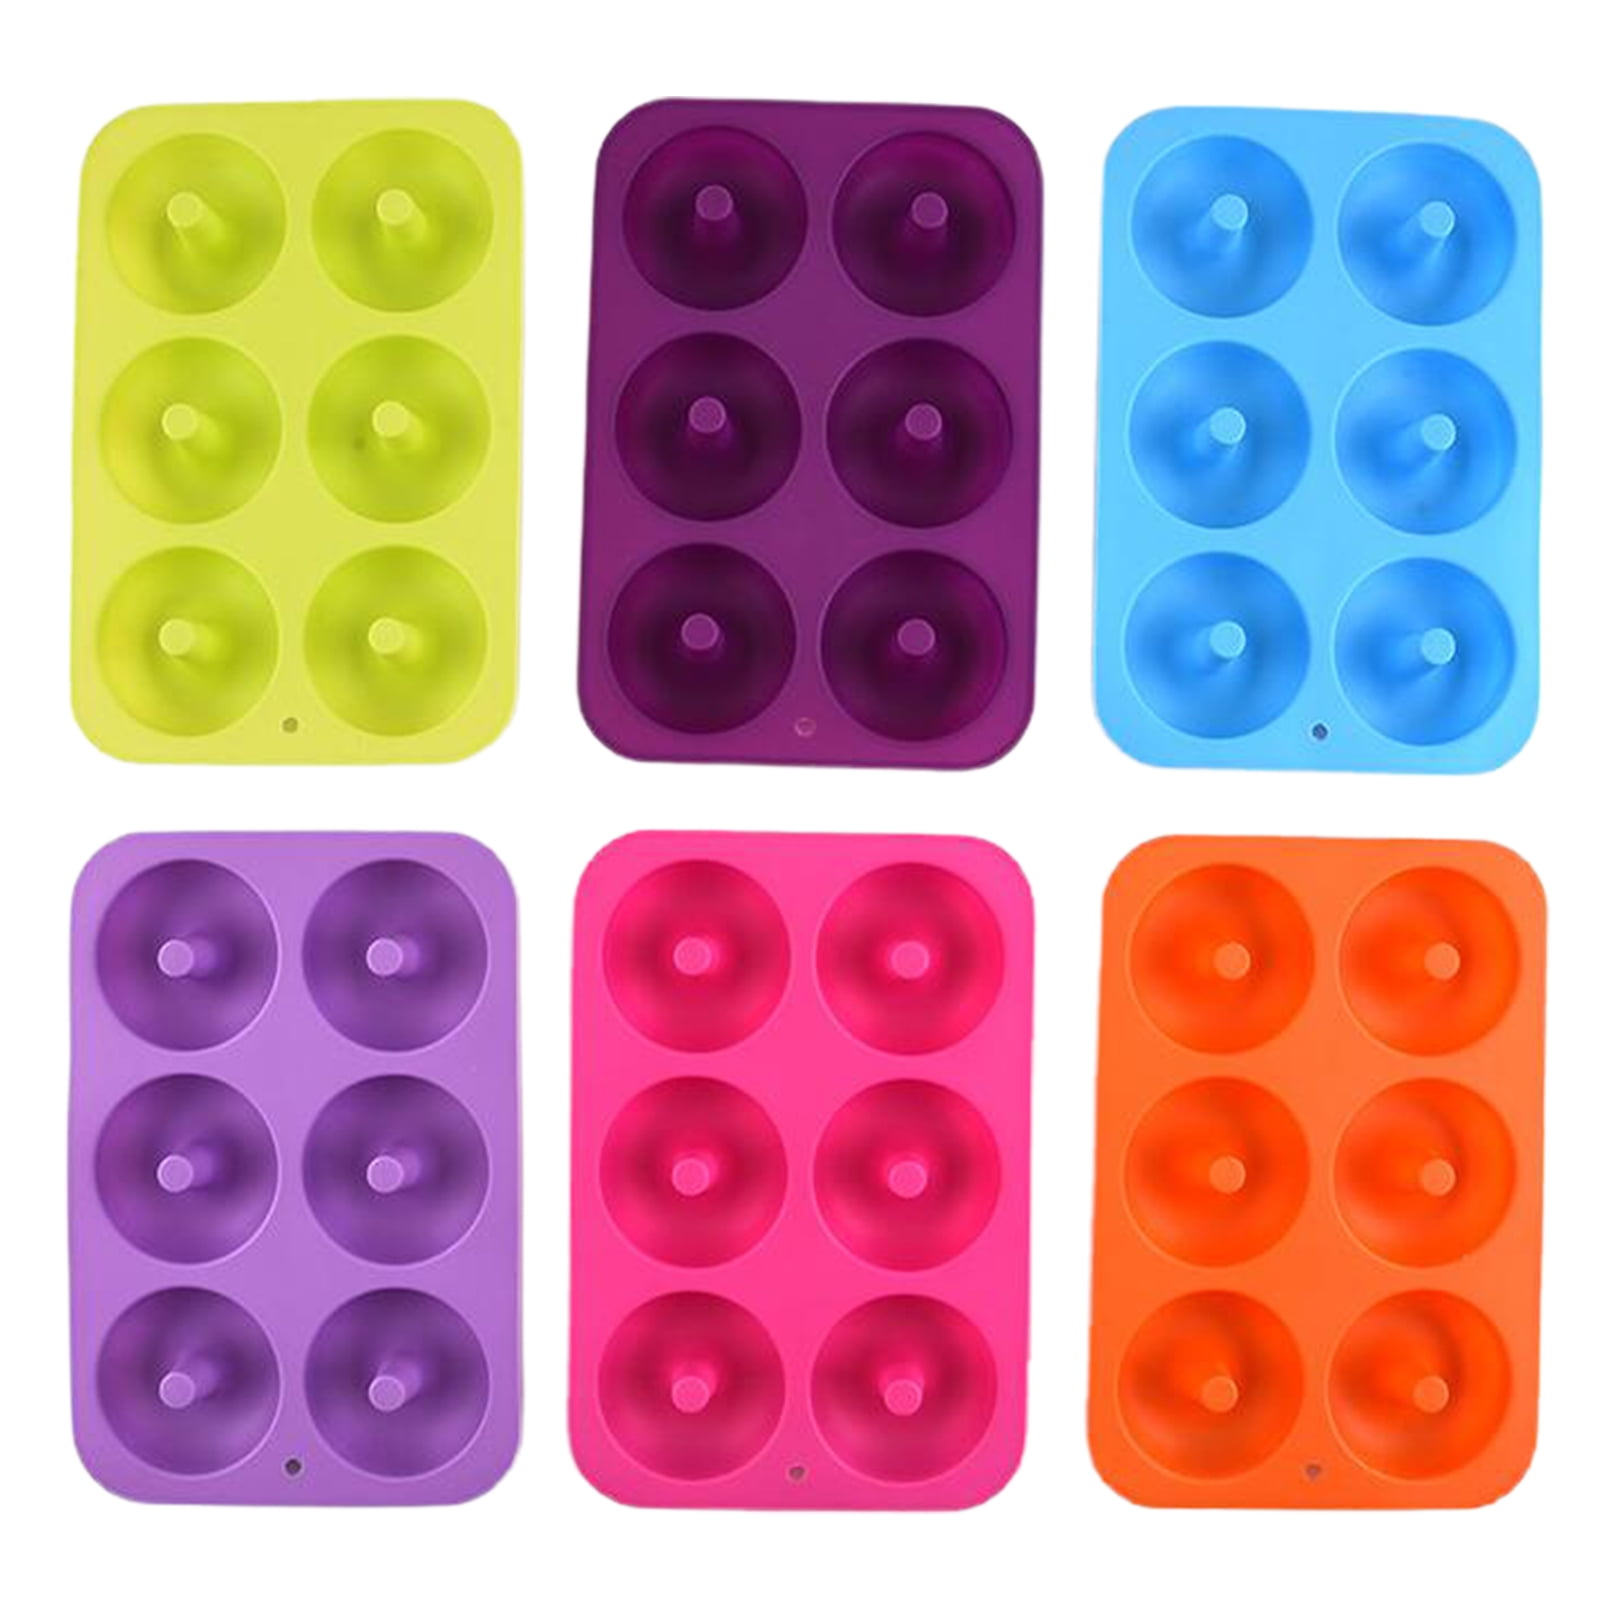 Silicone Donut Mould Muffin Cupcake NonStick Doughnut Mold Baking Pan Tray G4C9 